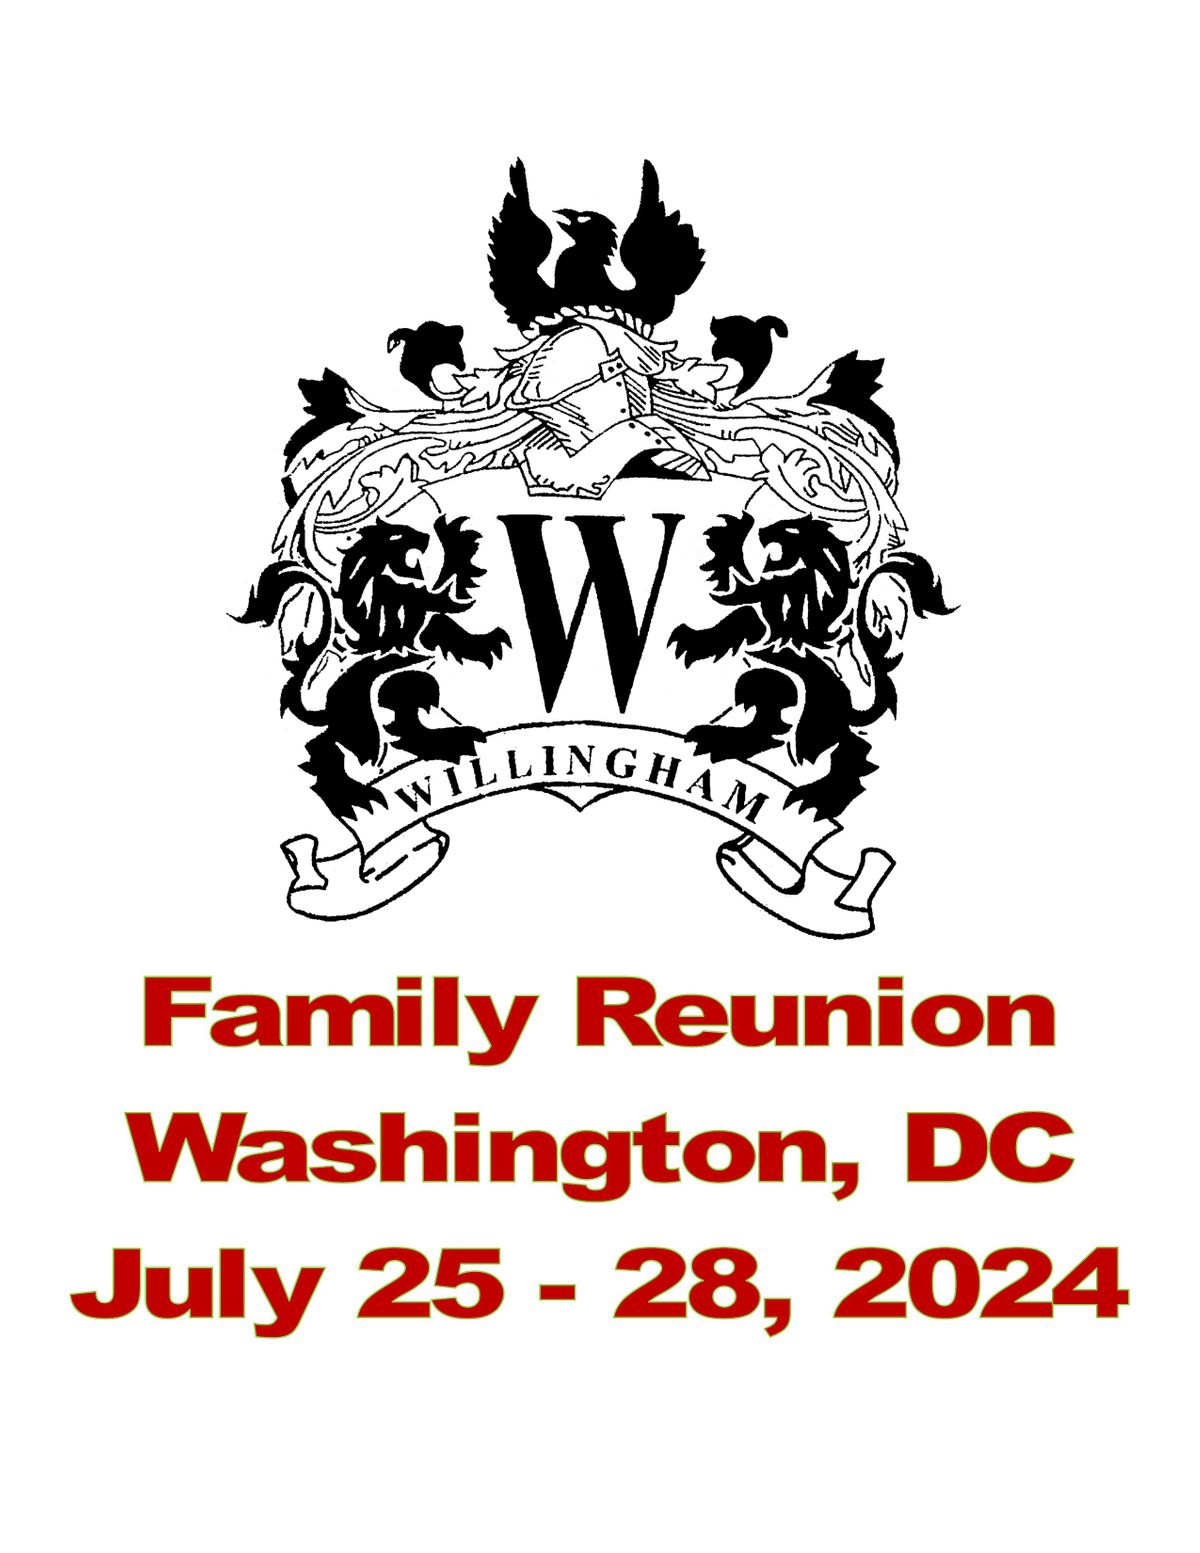 The WILLINGHAM Family Reunion